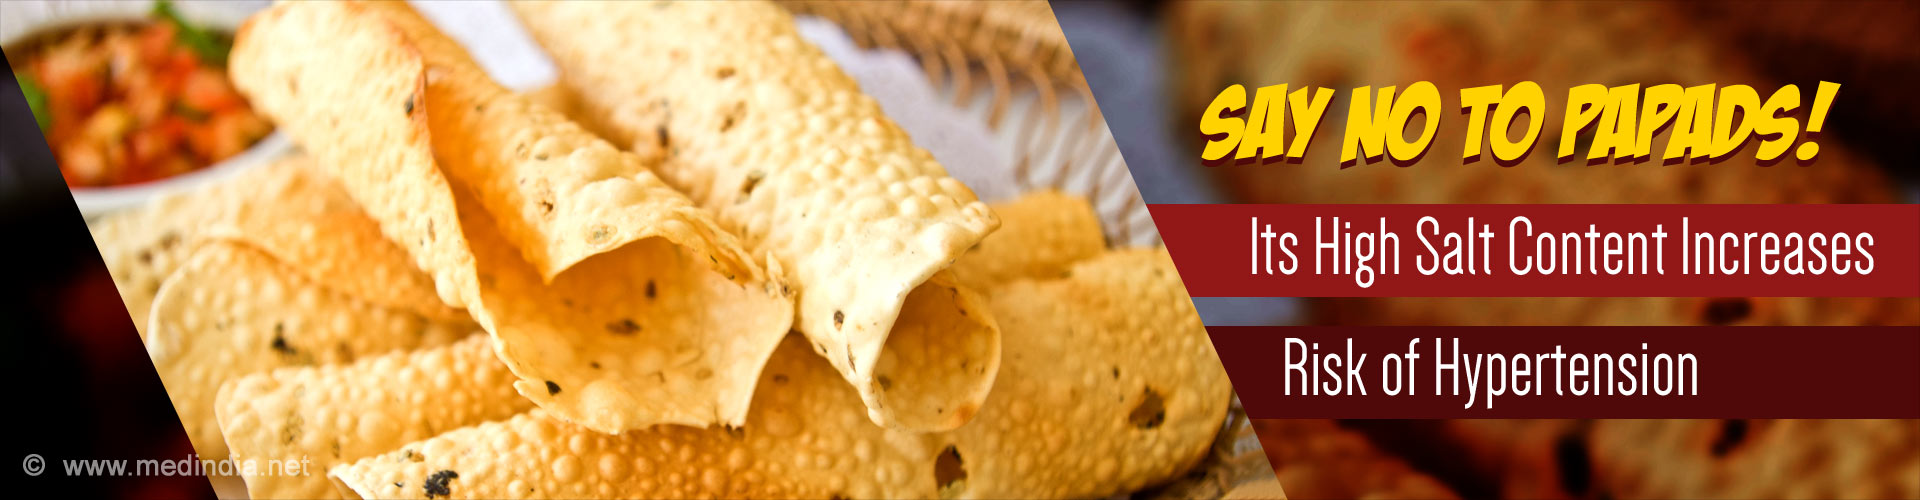 Say No to Papads! Its High Salt Content Increases Risk of Hypertension